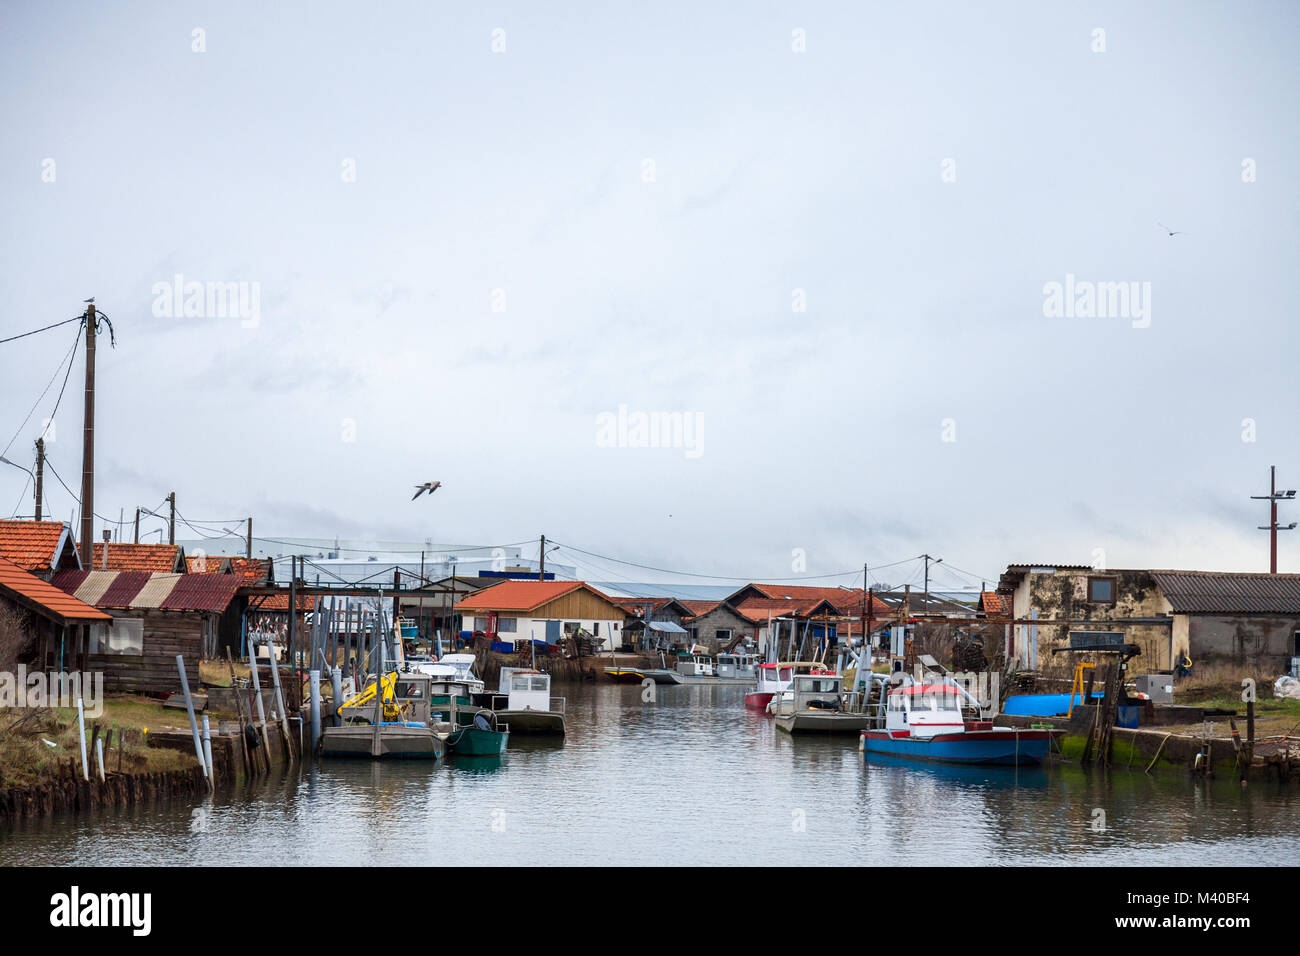 Oyster farmers huts in Gujan Mestras port on the Atlantic ocean during a cloudy rainy afternoon on Arachon Bay (Bassin d'Arcachon) in Southwestern Fra Stock Photo